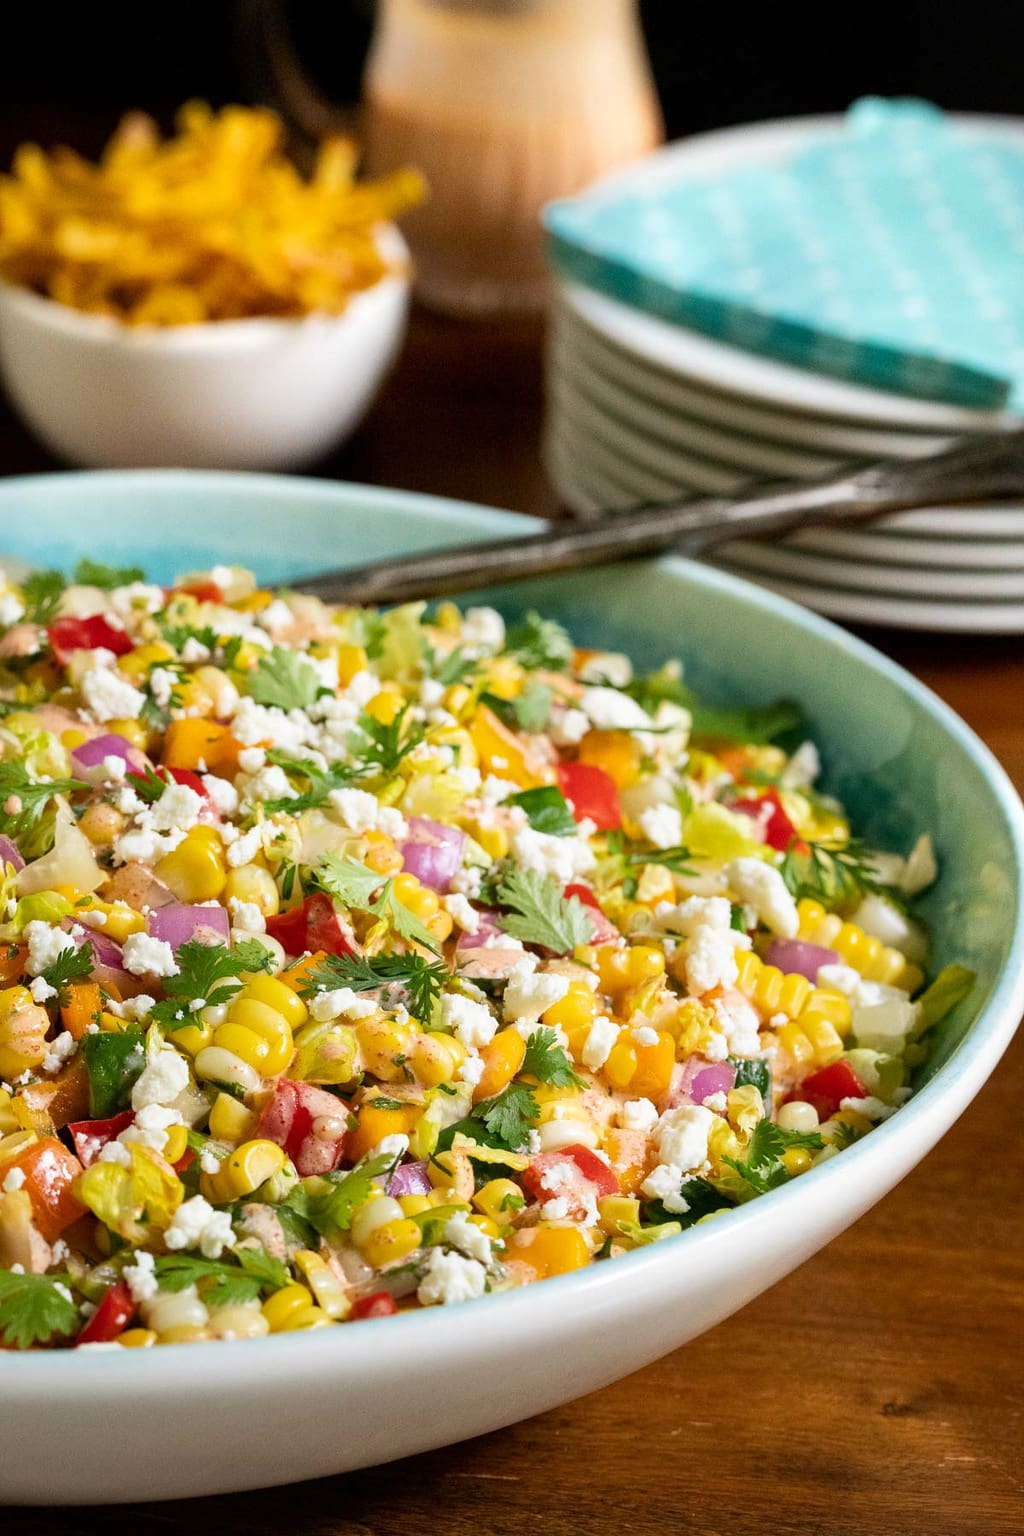 Vertical photo of Chopped Mexican Street Corn Salad in a white and turquoise serving bowl.